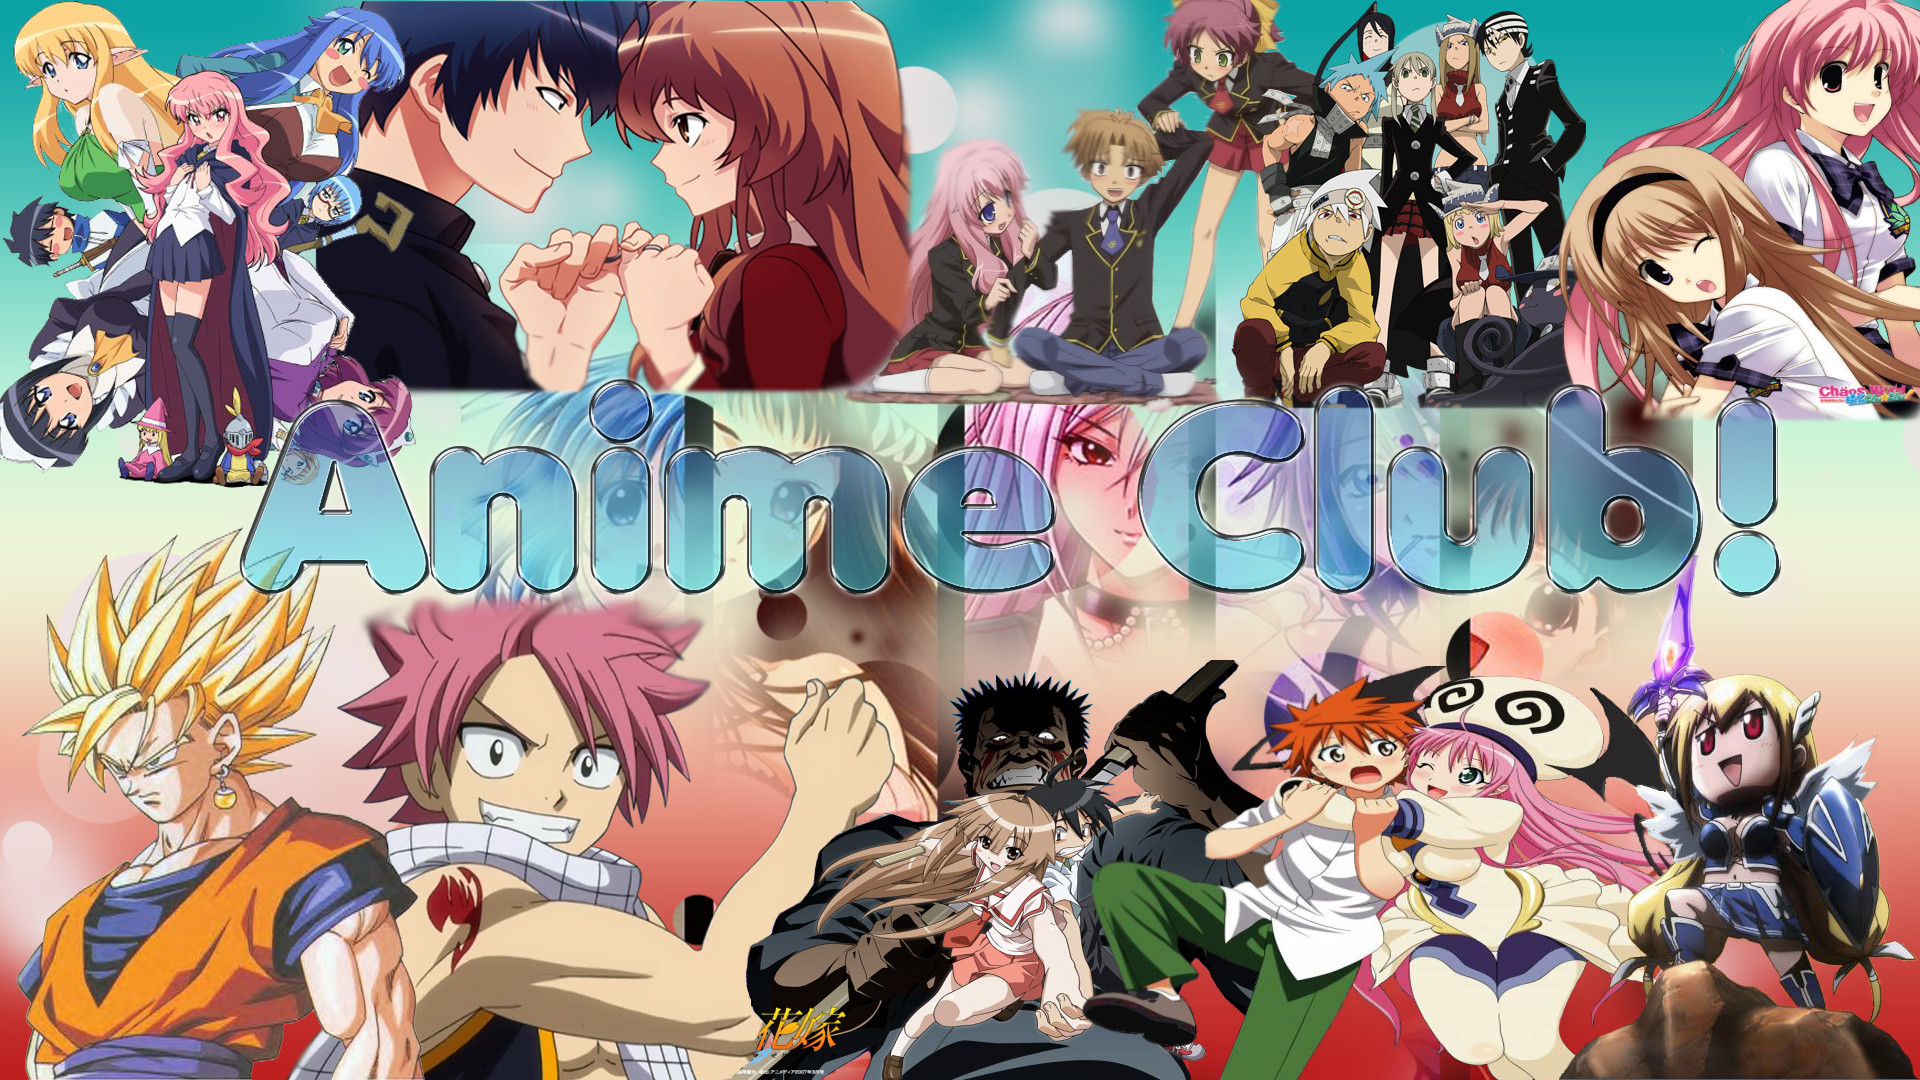 1920x1080 Awesome Anime Club images Anime Club () HD wallpaper and  background photos